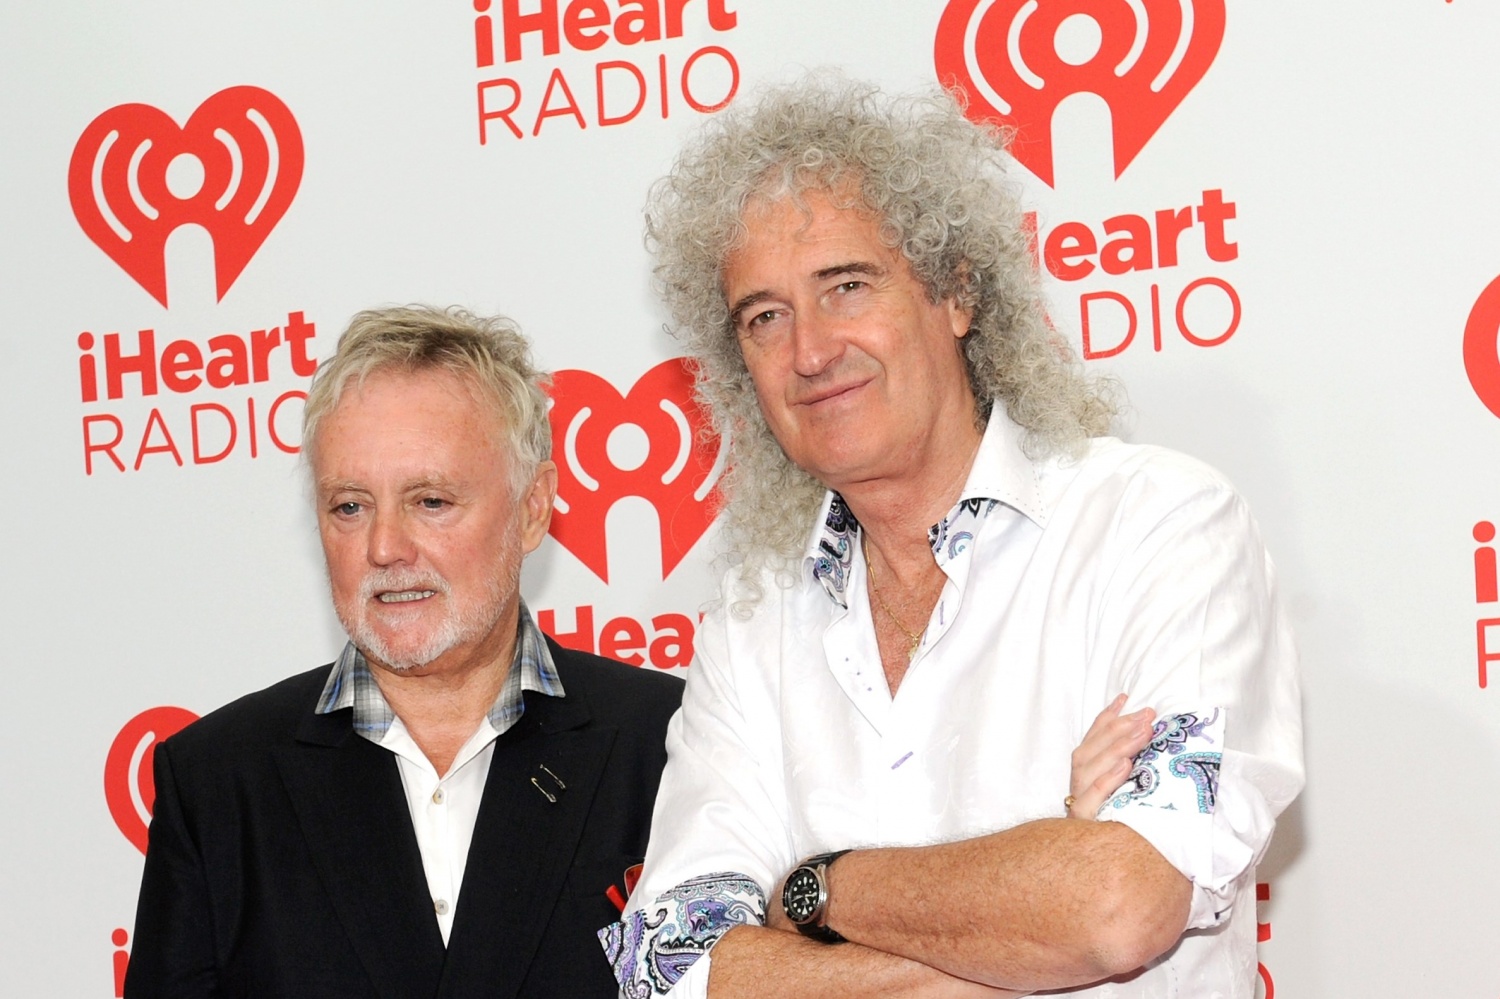 Queen Extravaganza: What To Know About Queen's 'Official Tribute Band' by Brian May, Roger Taylor